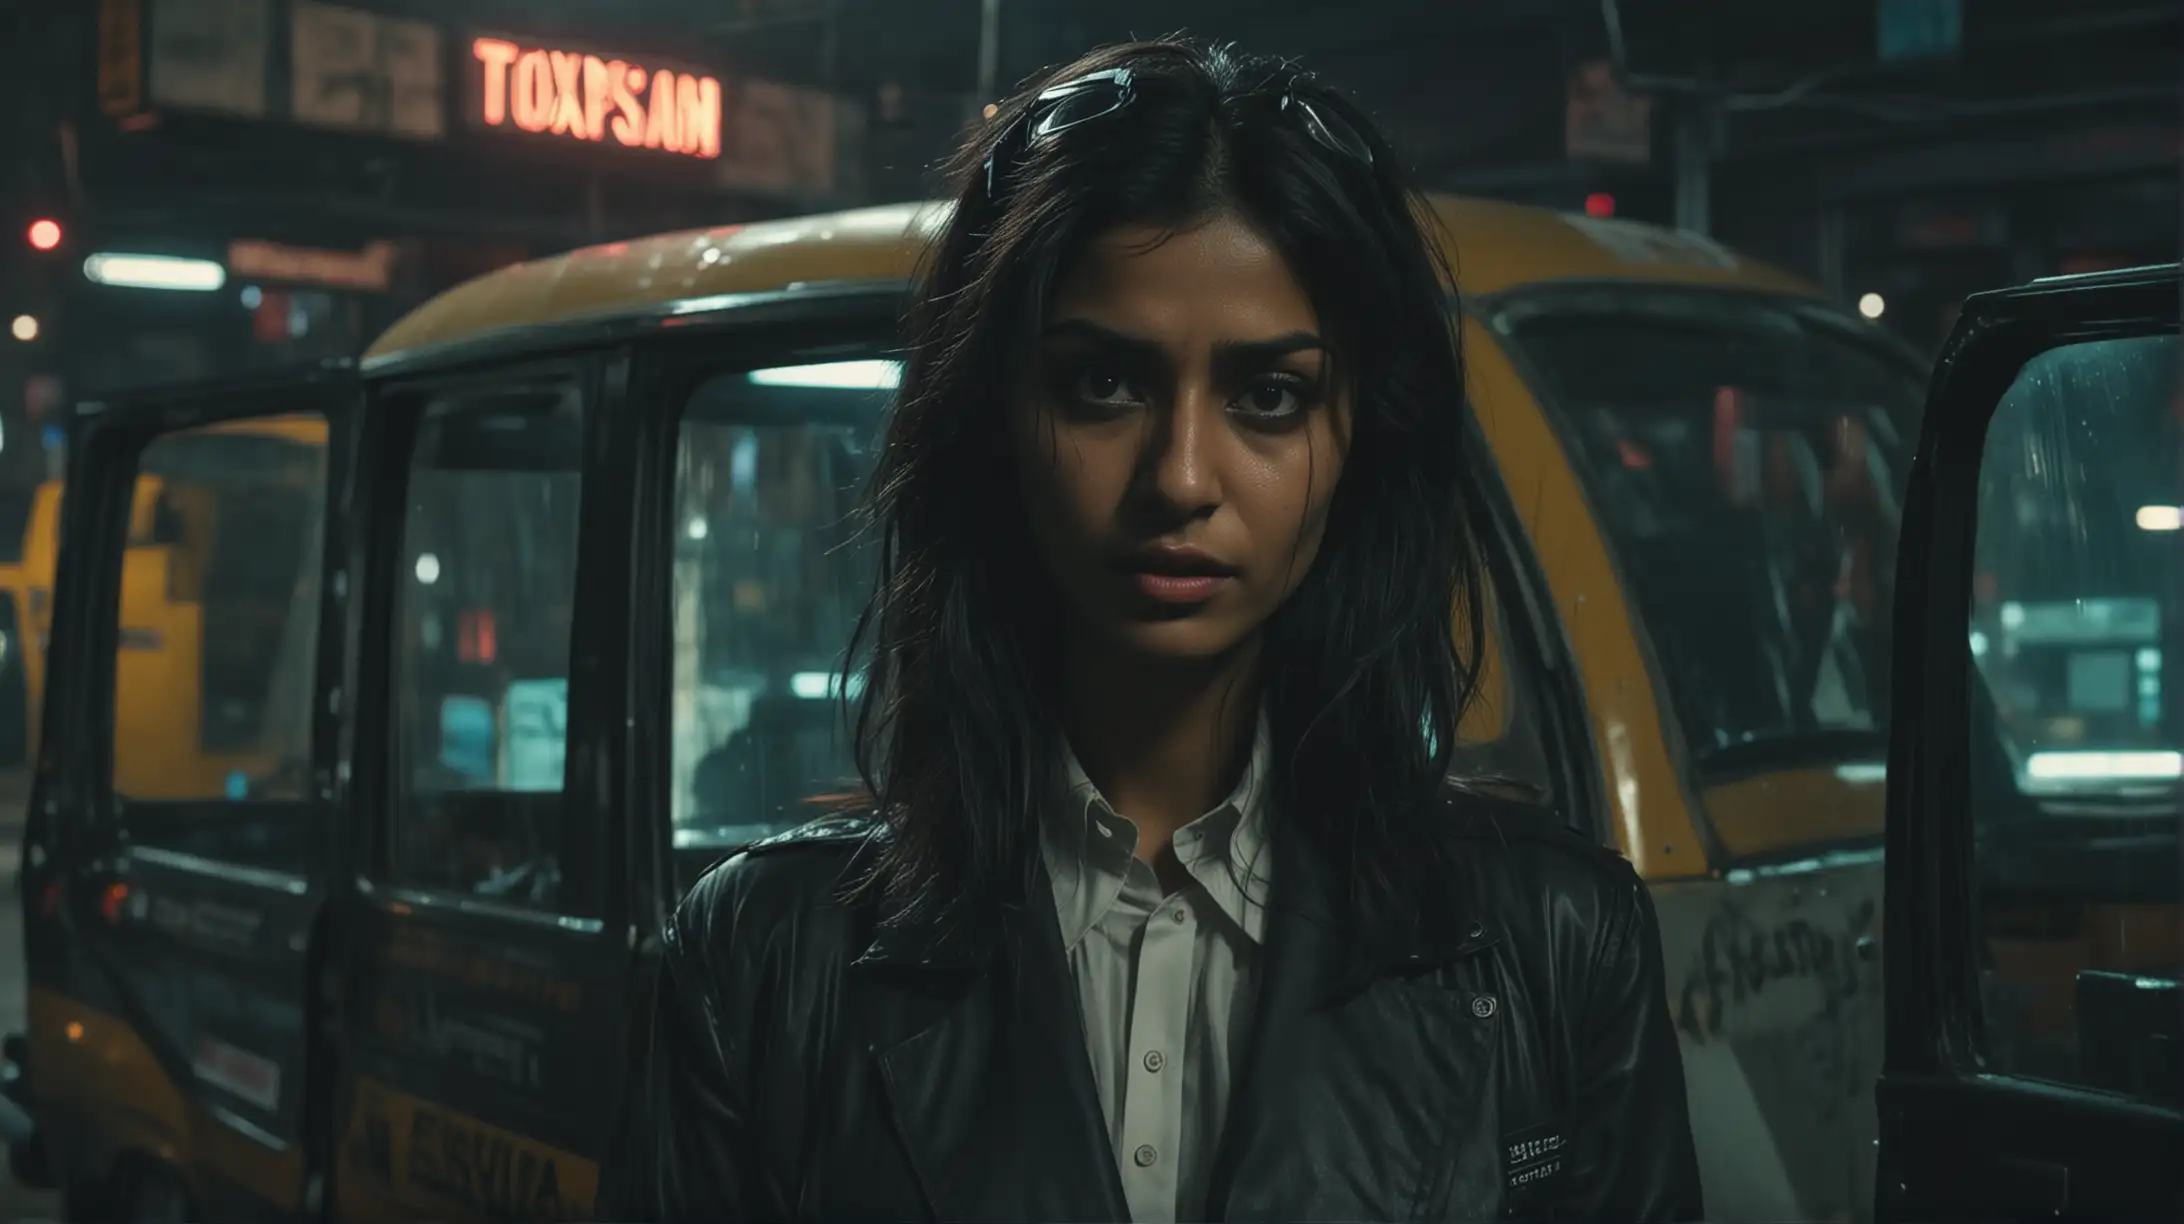 Dark gritty Pakistani taxi driver stand and talking to a sexy and hot Pakistani girl, cyberpunk, neo noir, erotic